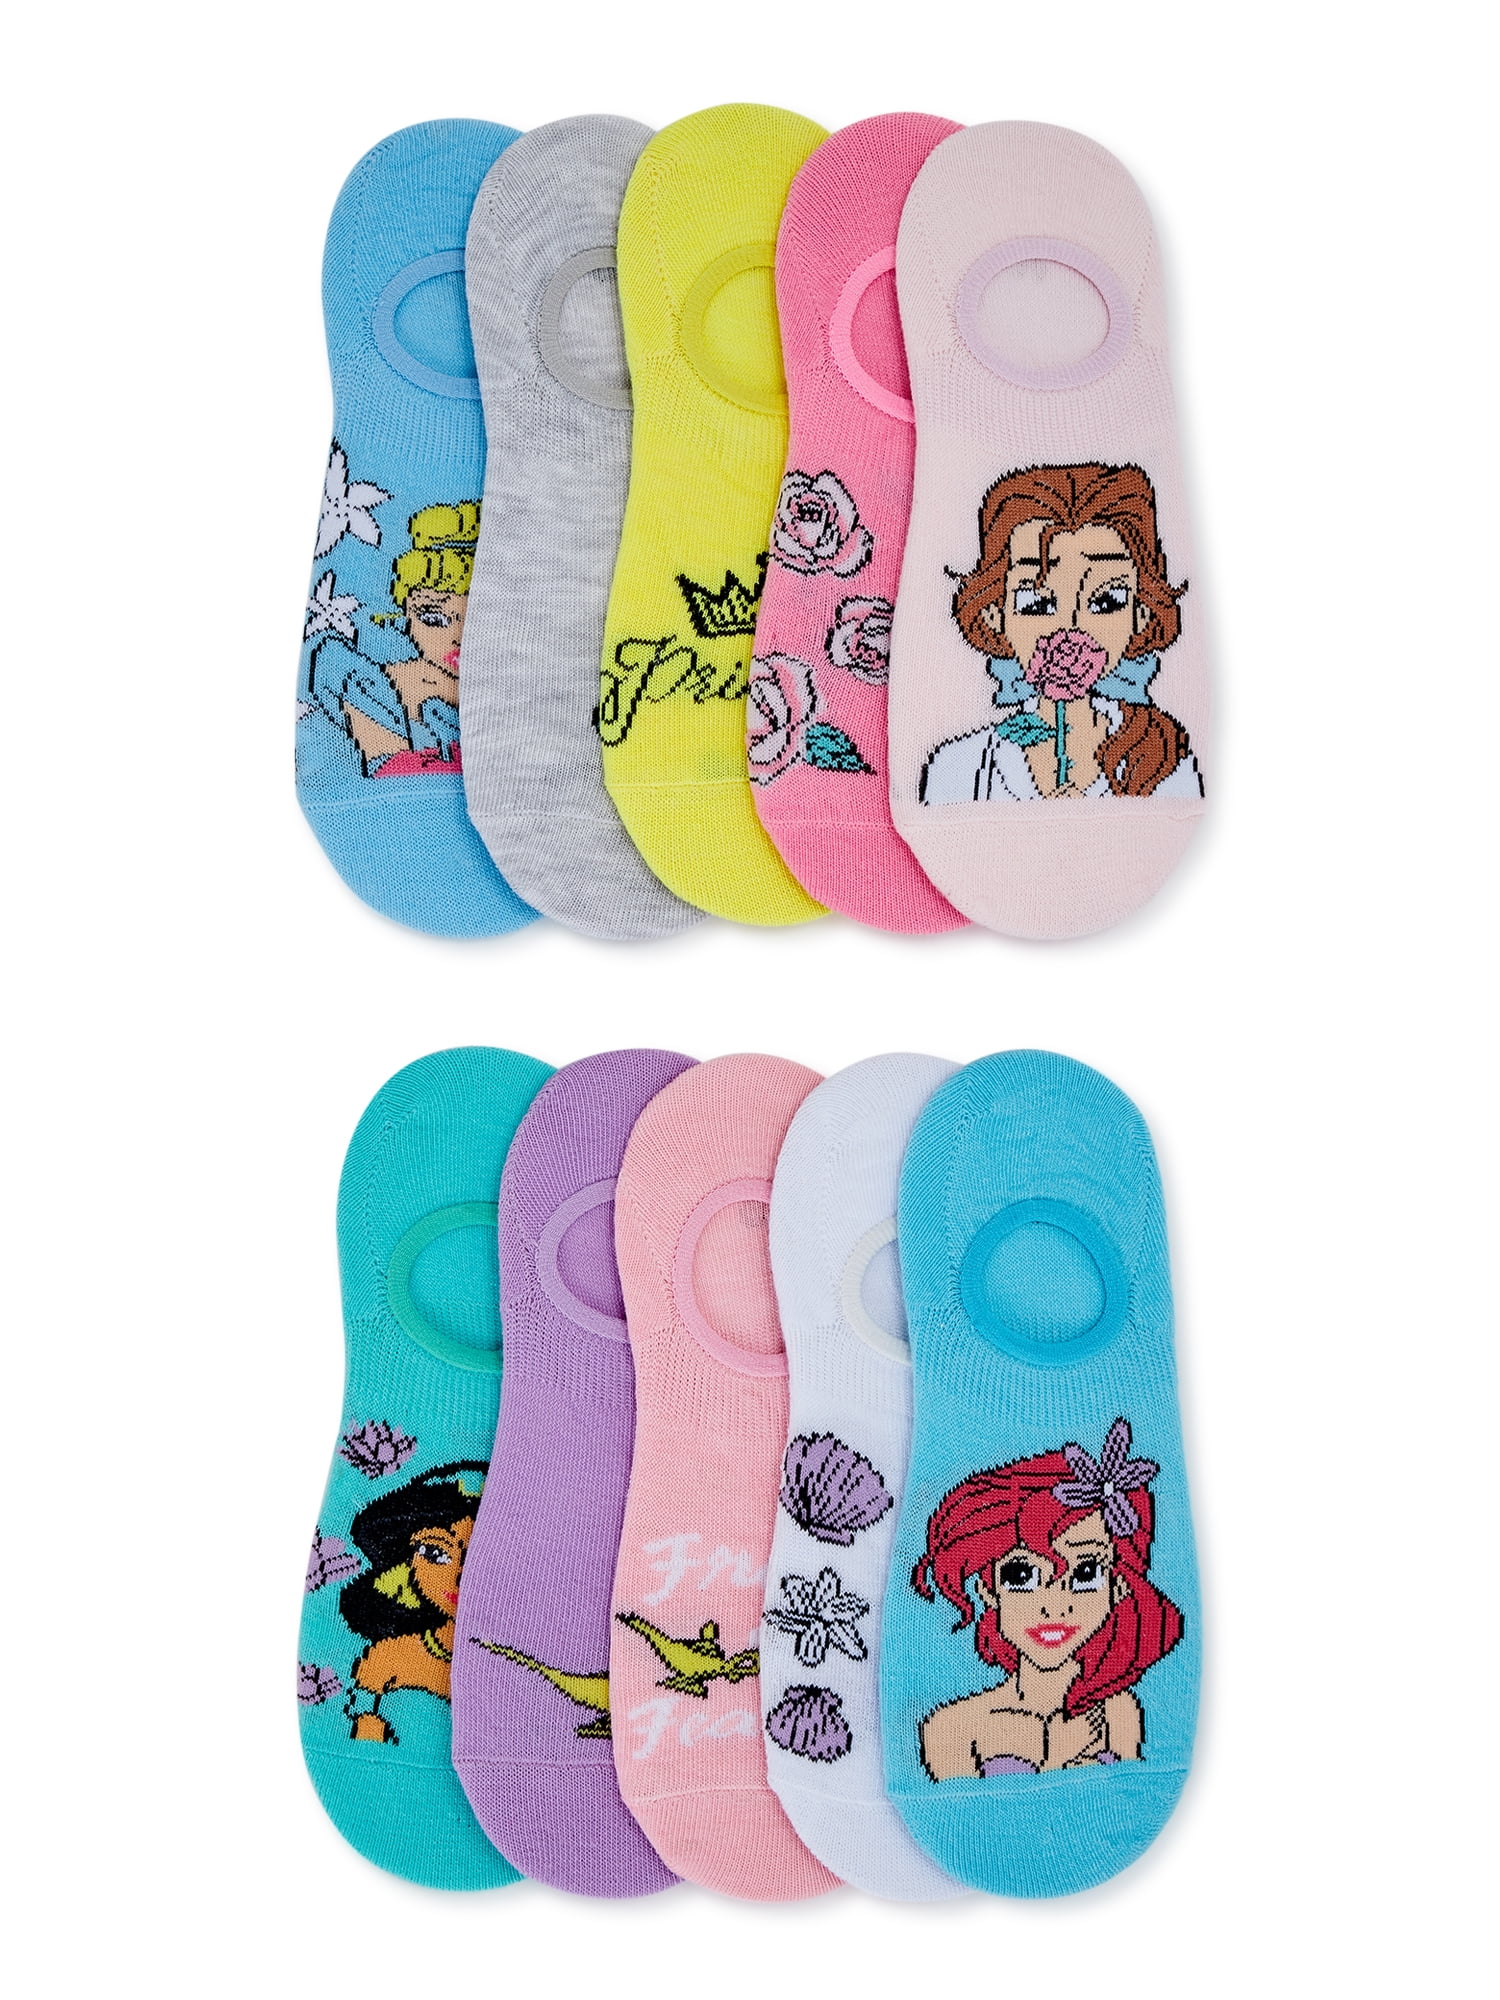 Disneys LADY AND THE TRAMP Shoe Liner Socks Three Pack Ladies SIZE 4-8 3